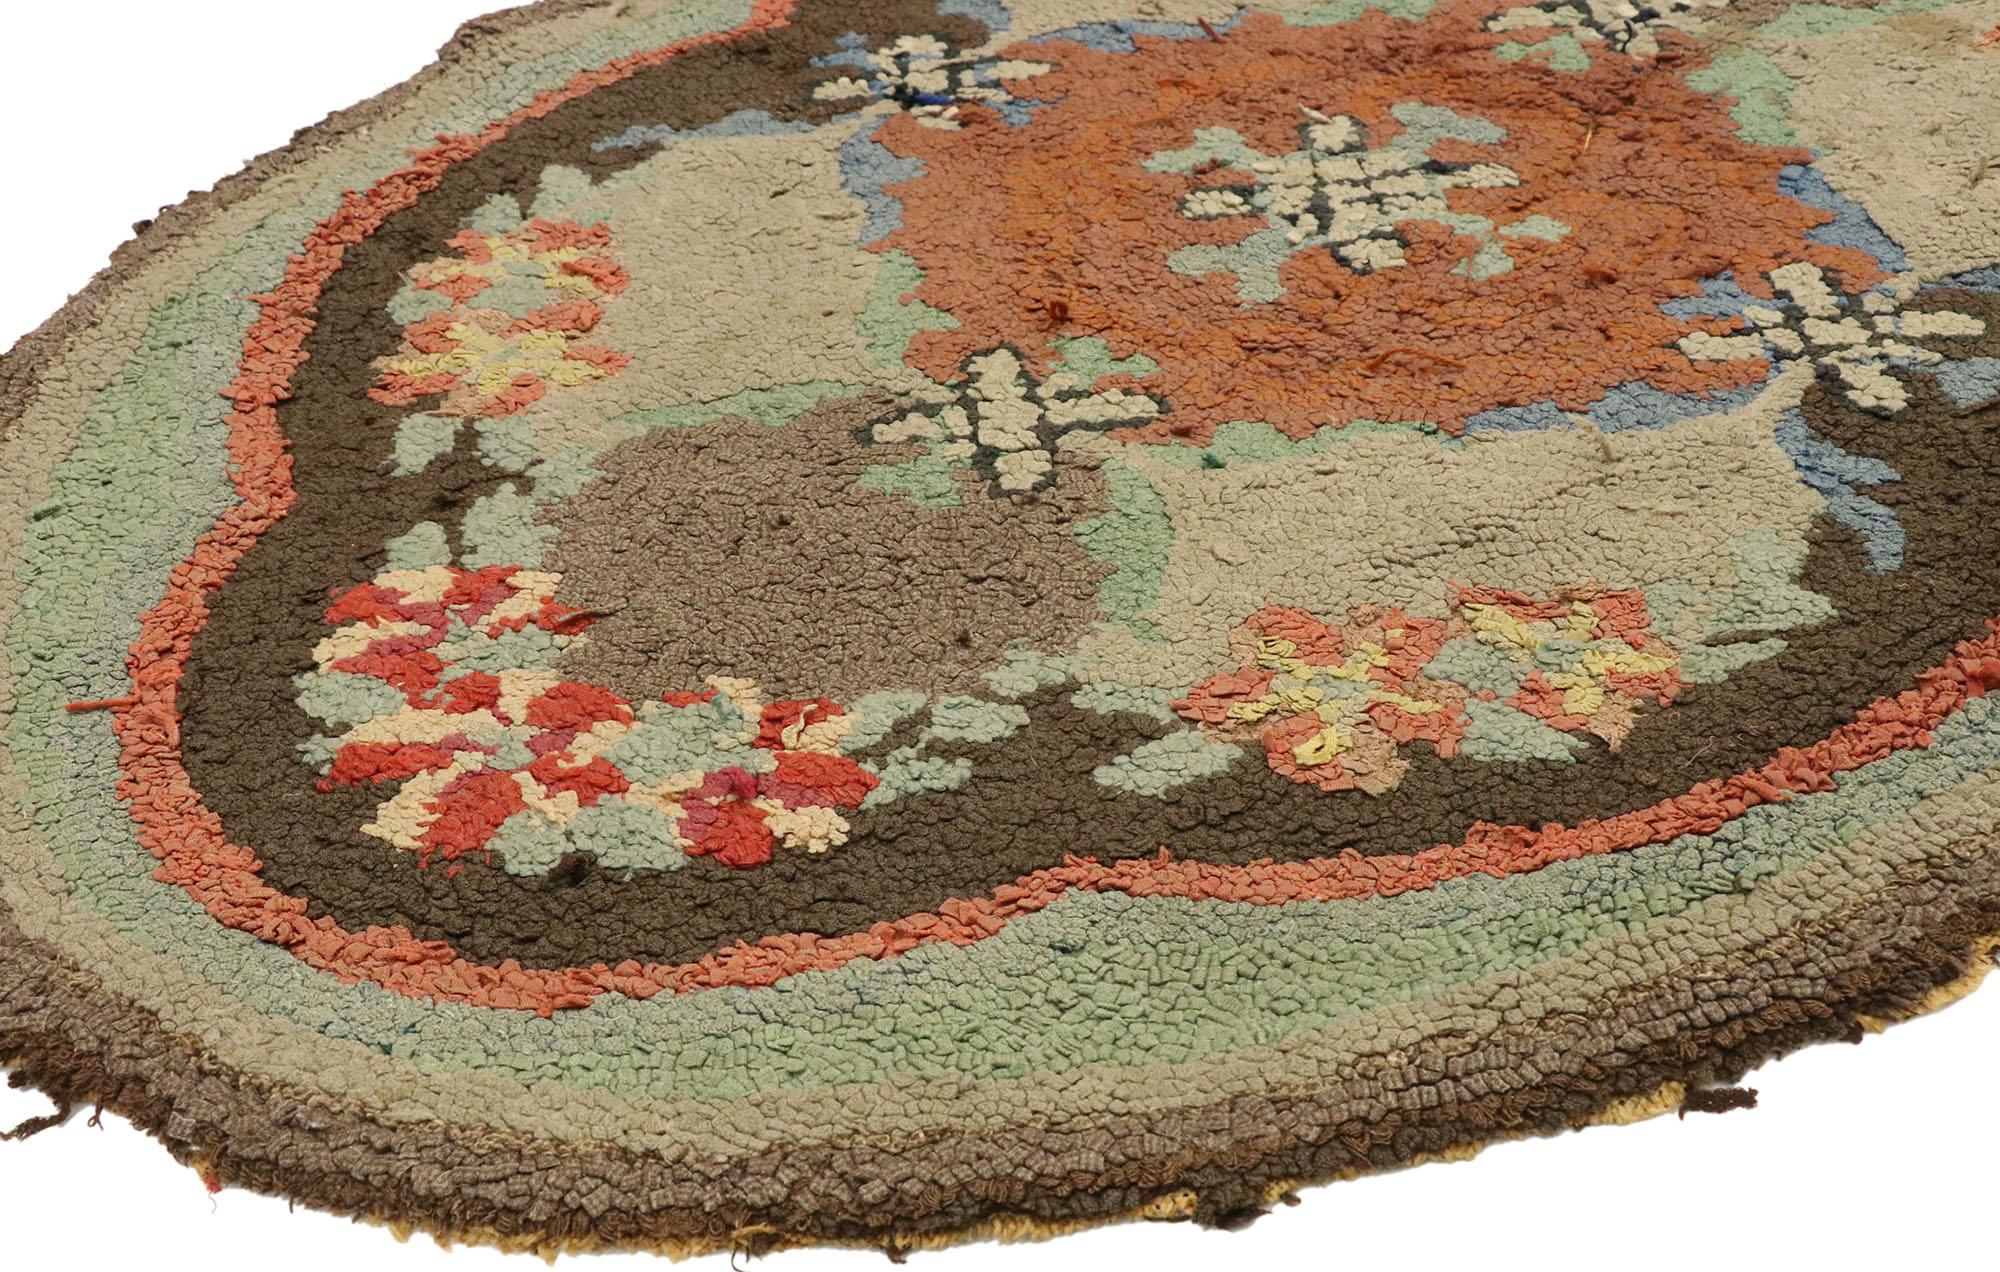 74355, distressed antique American hooked oval rug with American Colonial style. Showcasing timeless elegance and rugged beauty, this lovingly time-worn antique American hooked oval rug beautifully embodies American Colonial style. It features a